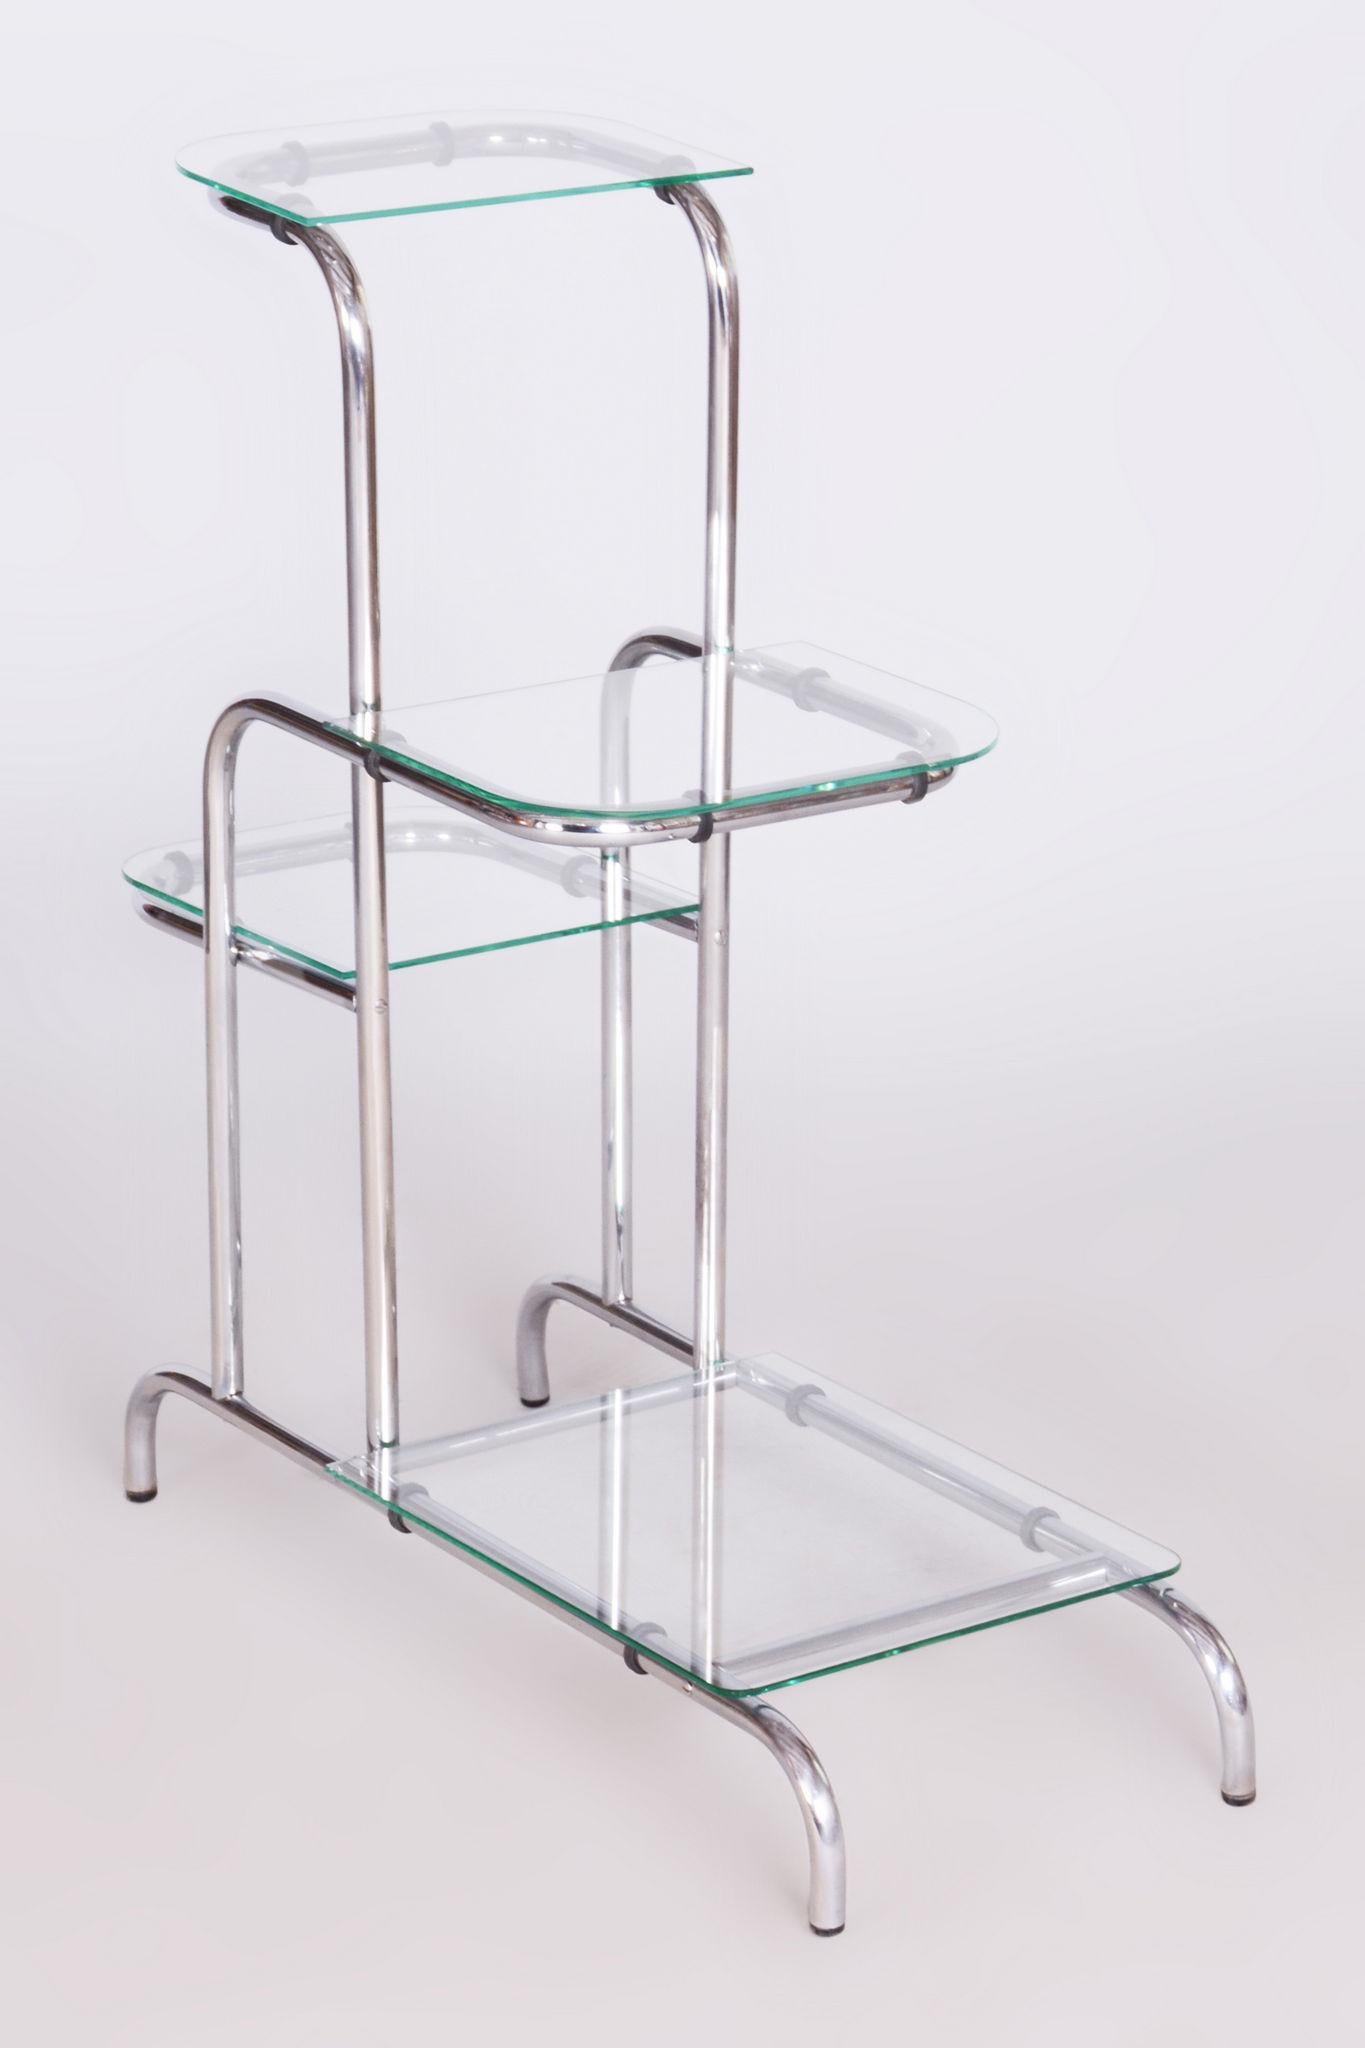 Restored Bauhaus Etagere.

Source: Czechia (Czechoslovakia)
Period: 1930-1939
Material: Chrome-Plated Steel, Glass

The chrome parts have been professionally cleaned. 

This item features classic Bauhaus design elements. Elements of this style are